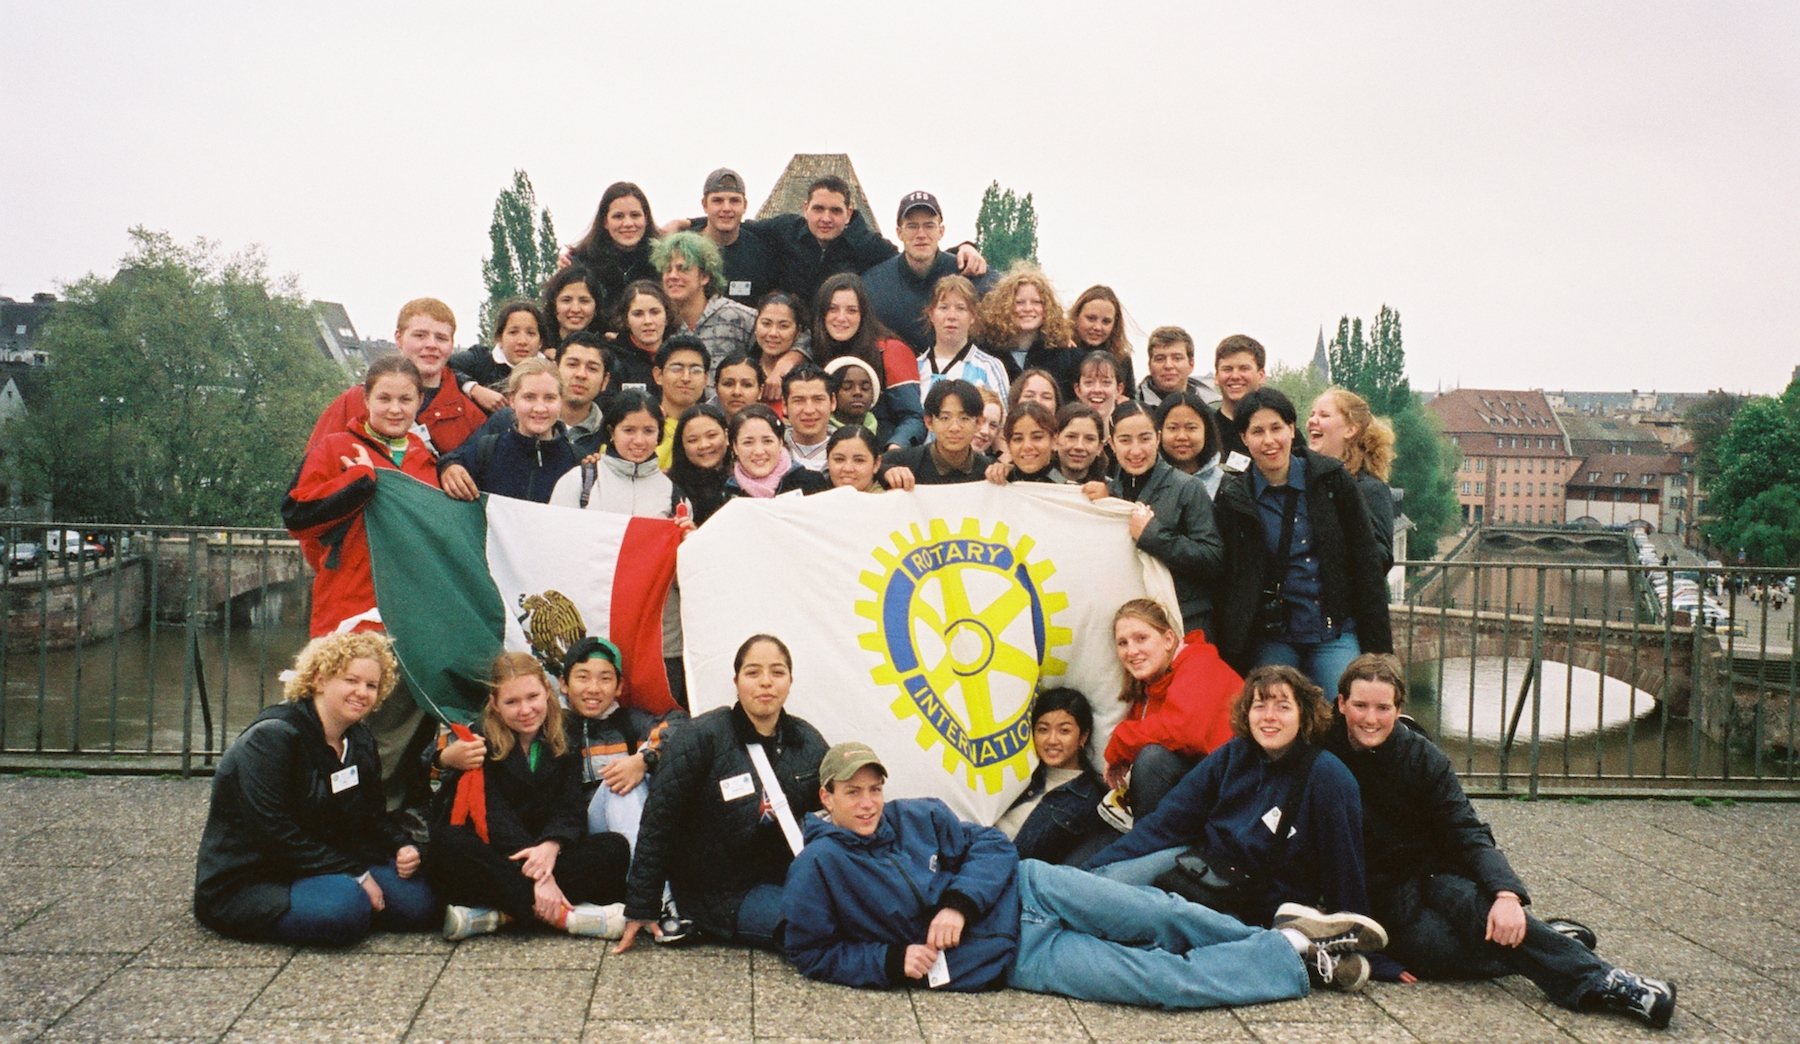 The consequences of Rotary Youth Programs